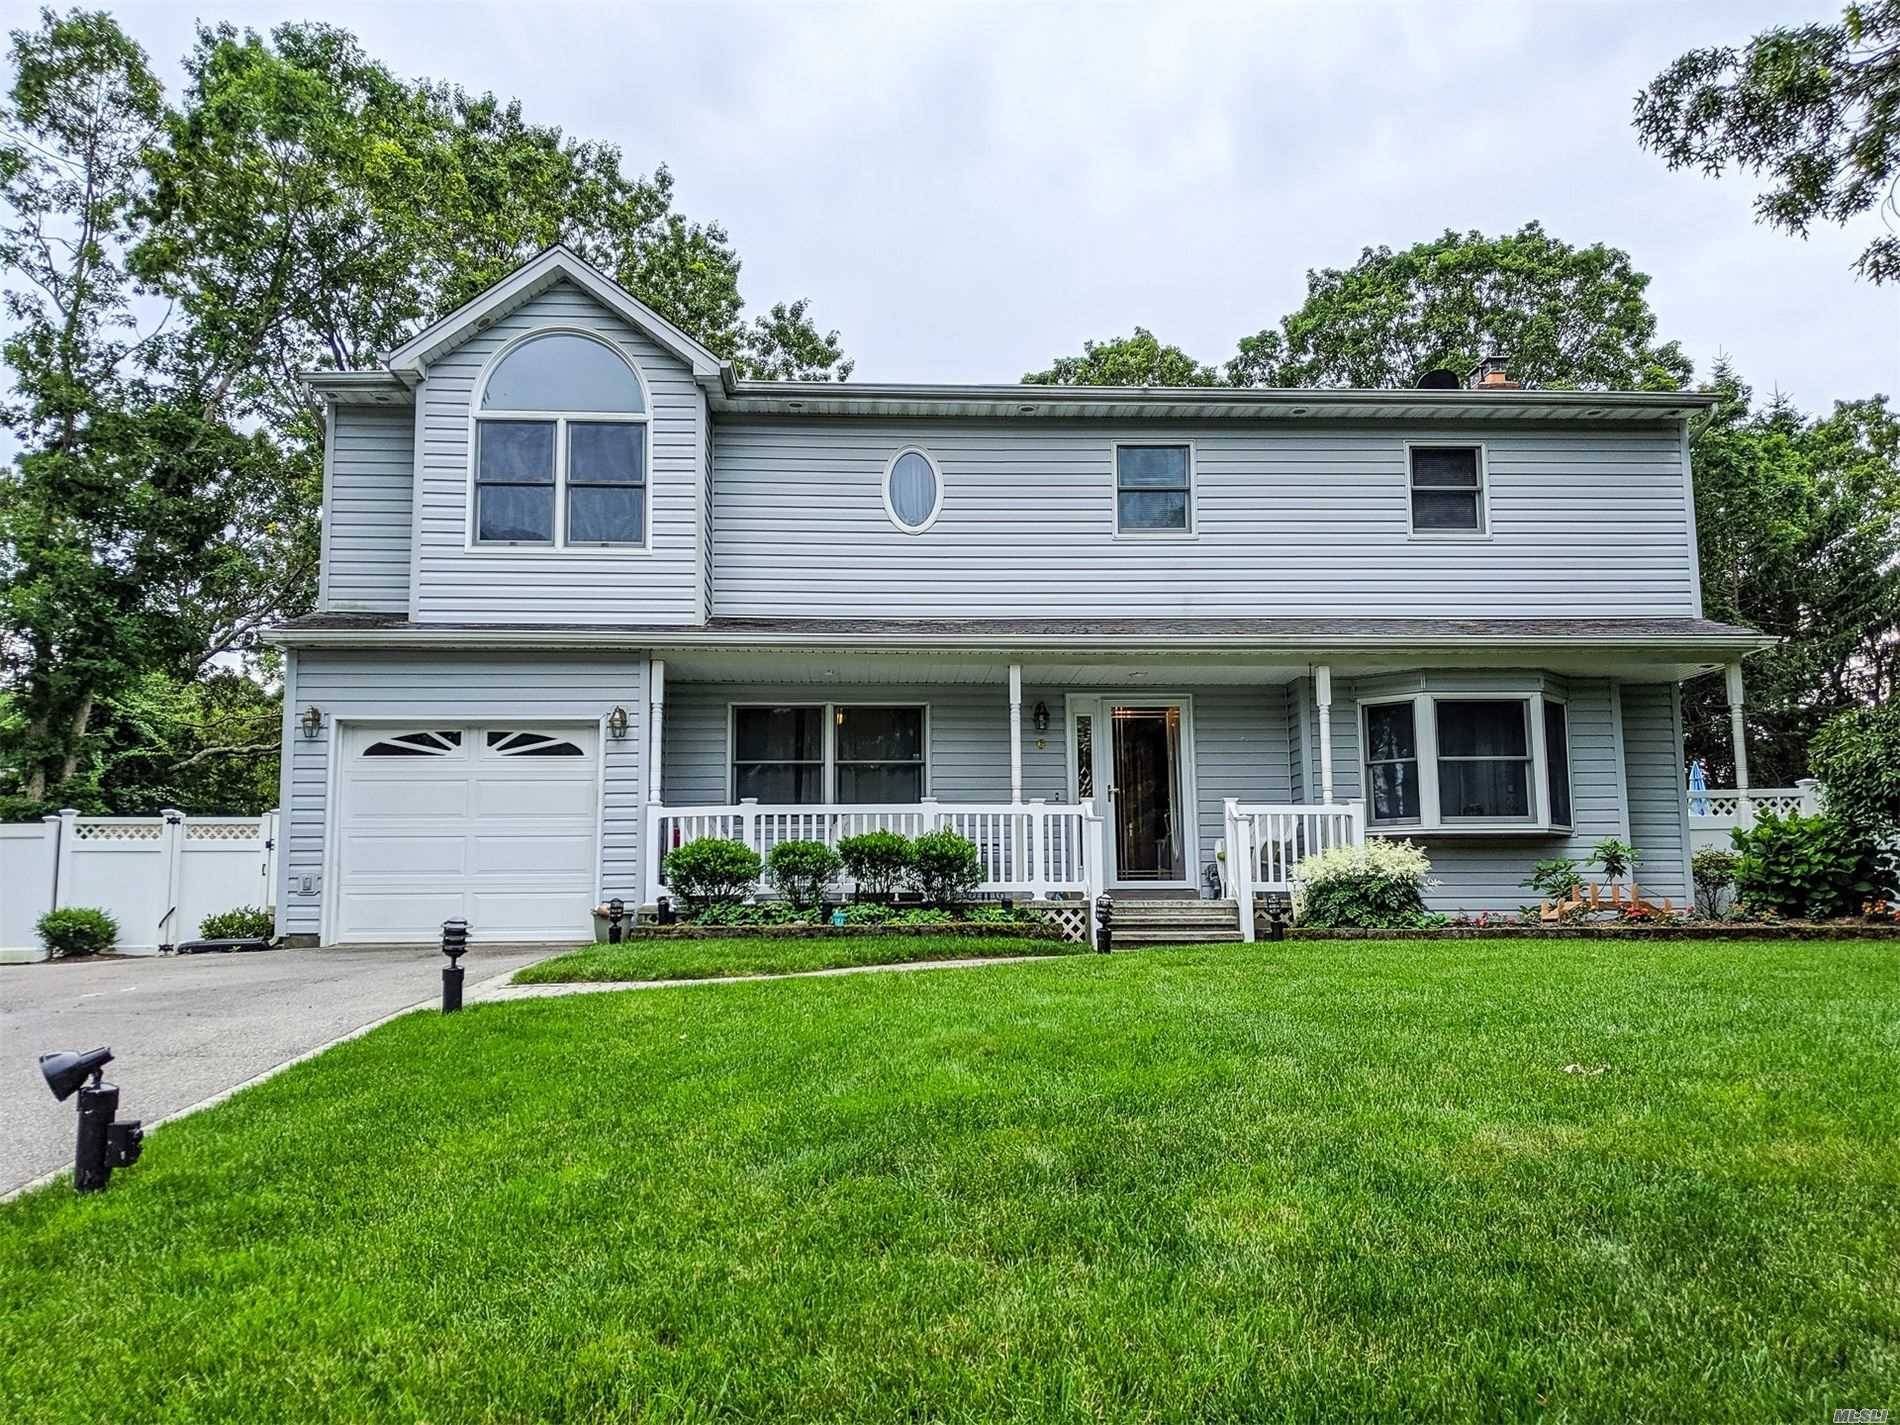 An Unbelievable Opportunity To Own This Updated And Well Maintained Colonial Located On A Quiet Cul De Sac That Is Priced To Sell !